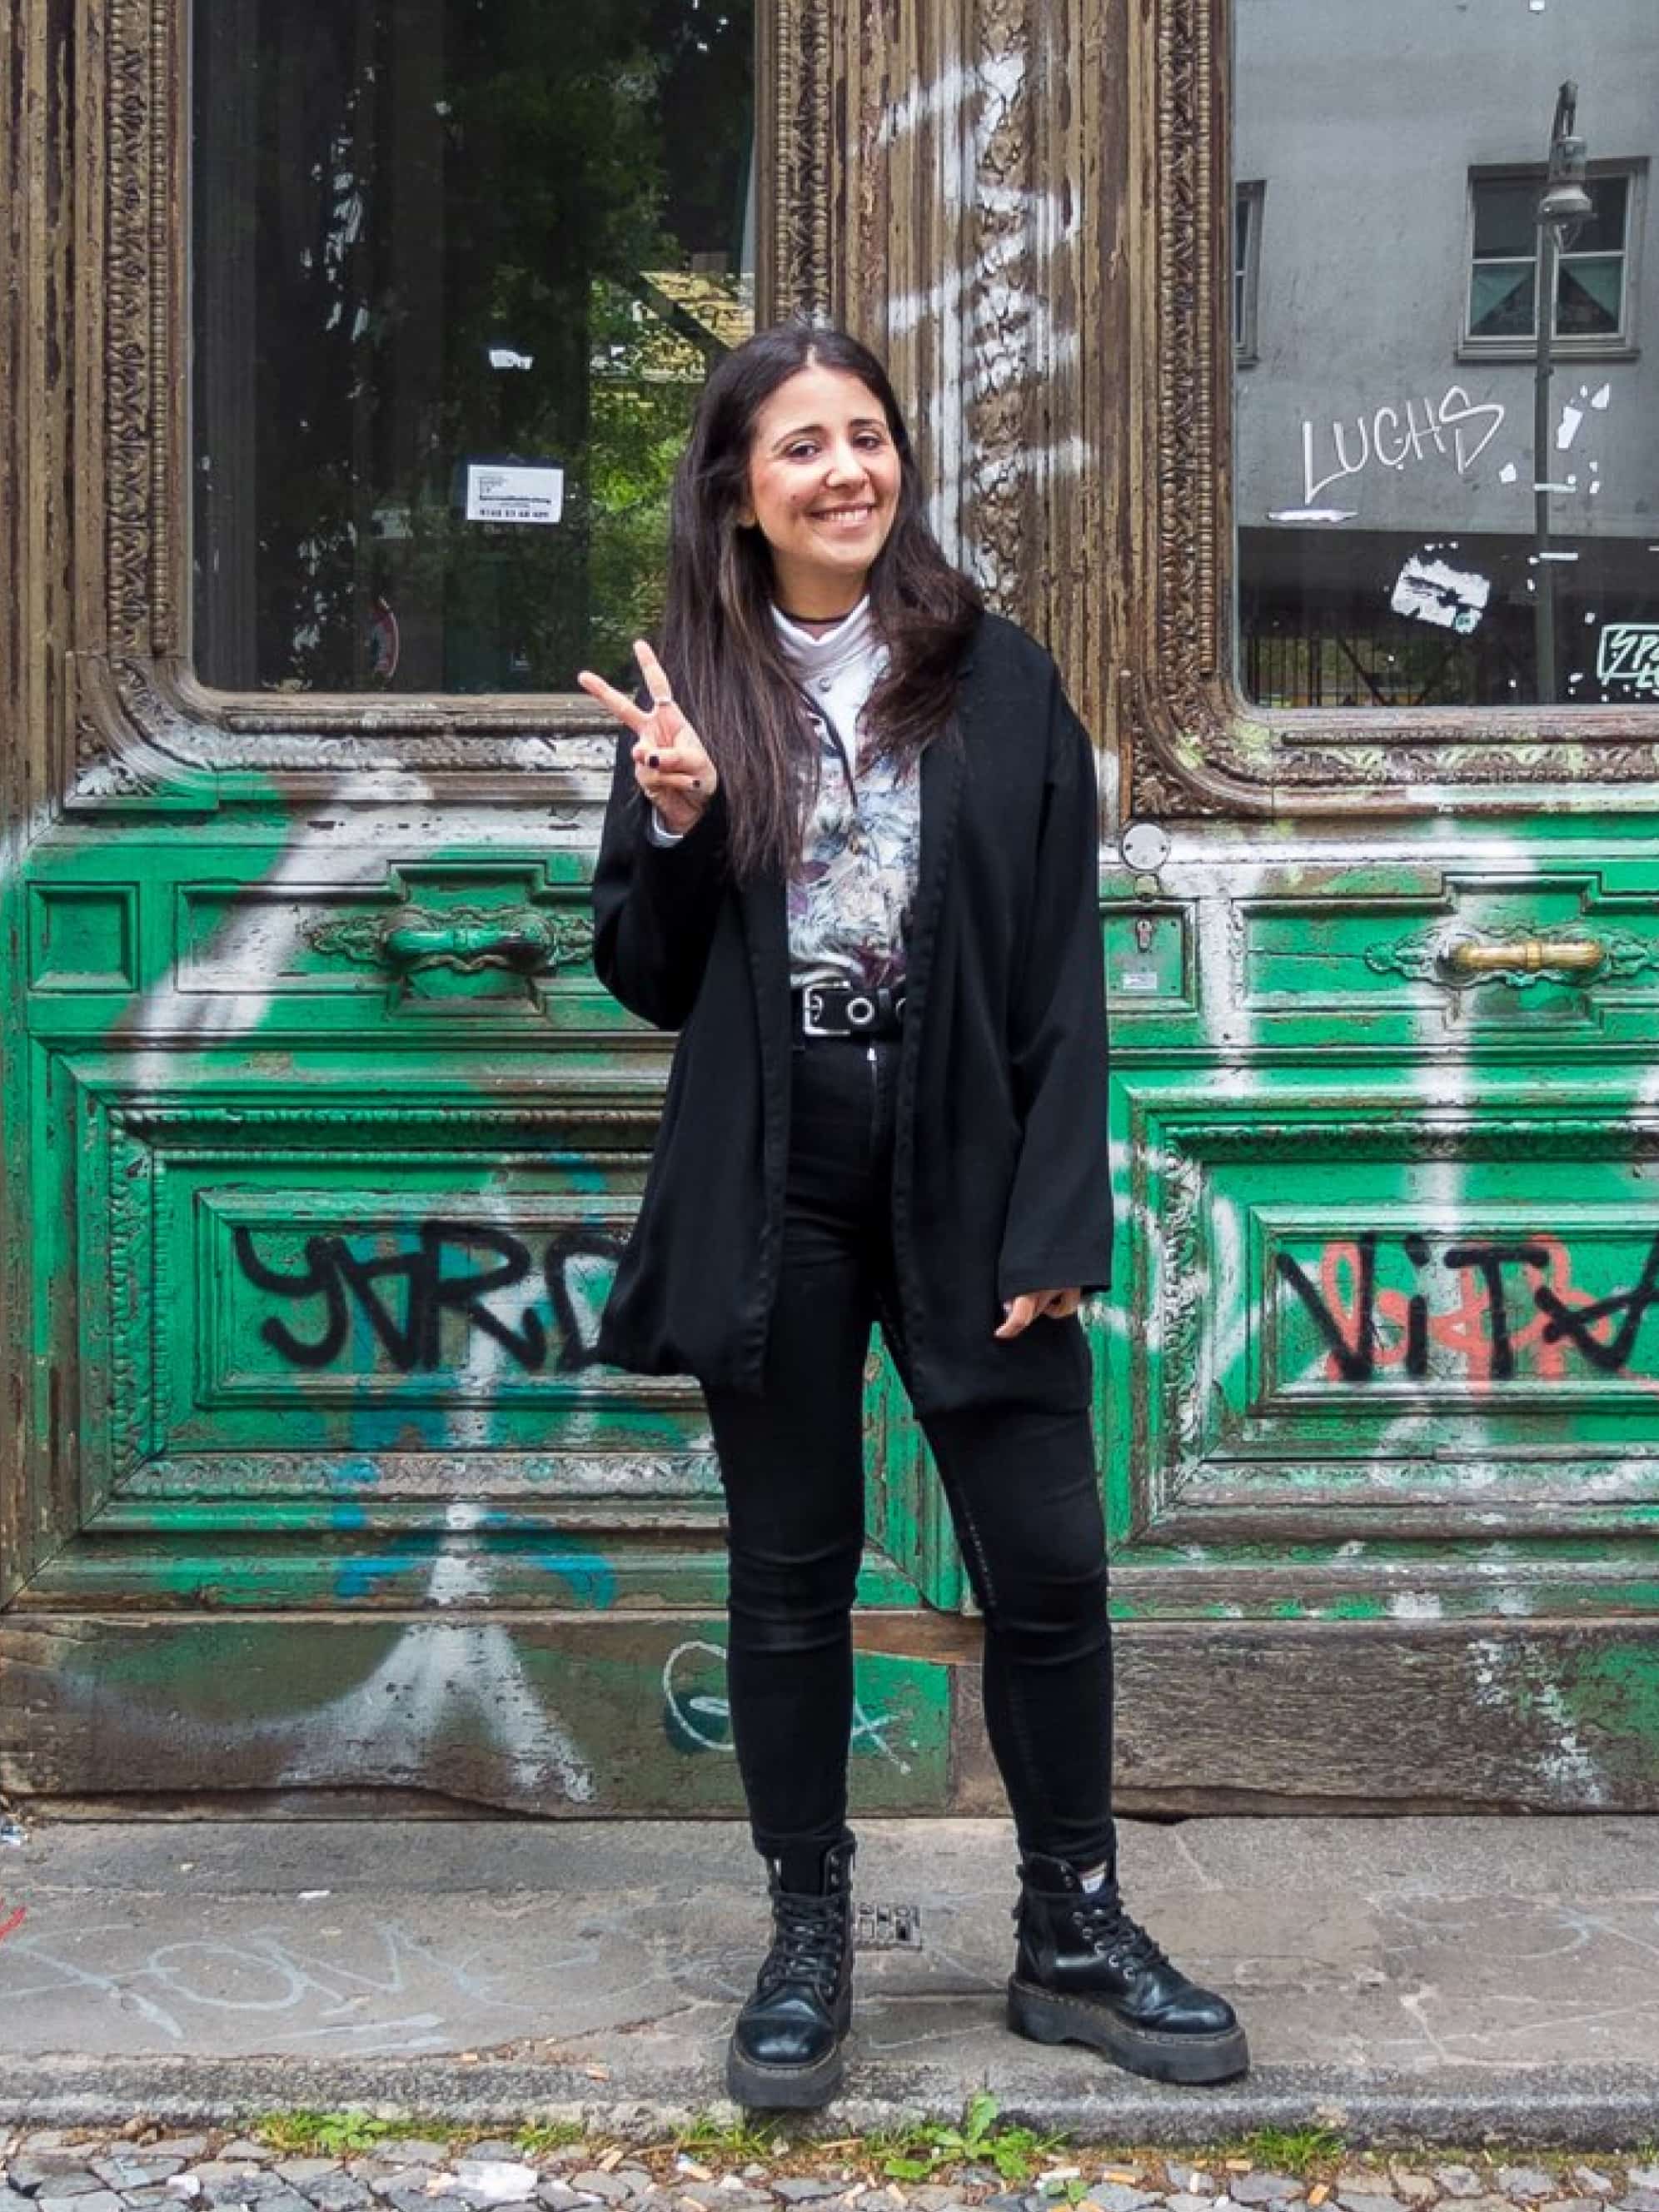 A woman in a black jacket and jeans stands in front of a green door and makes a peace sign with her right hand.